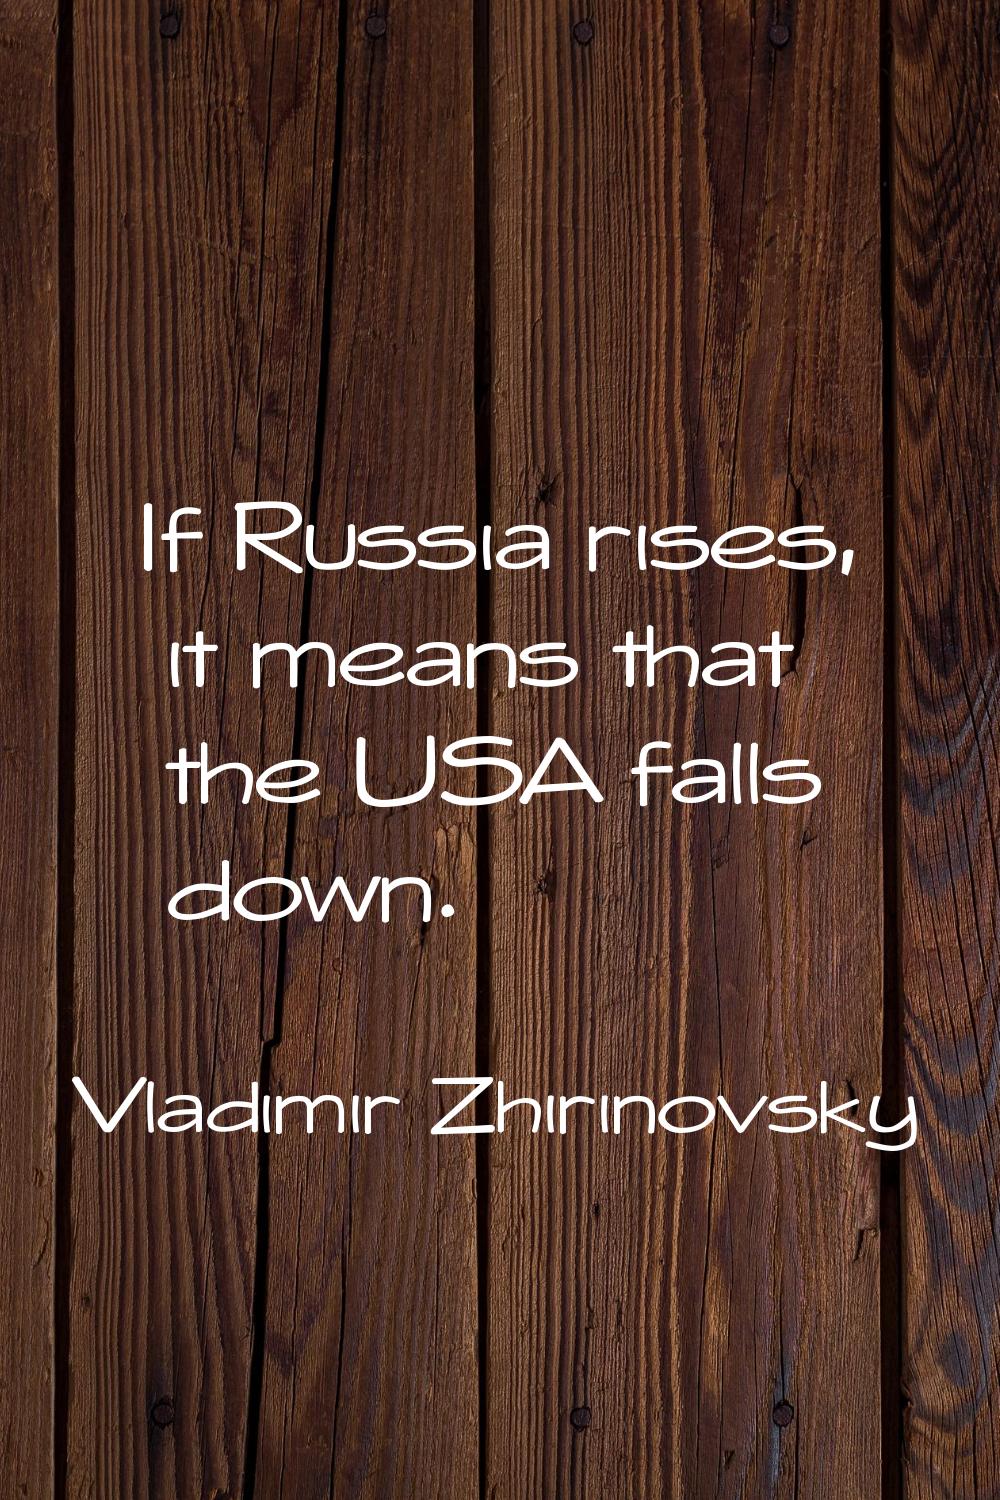 If Russia rises, it means that the USA falls down.